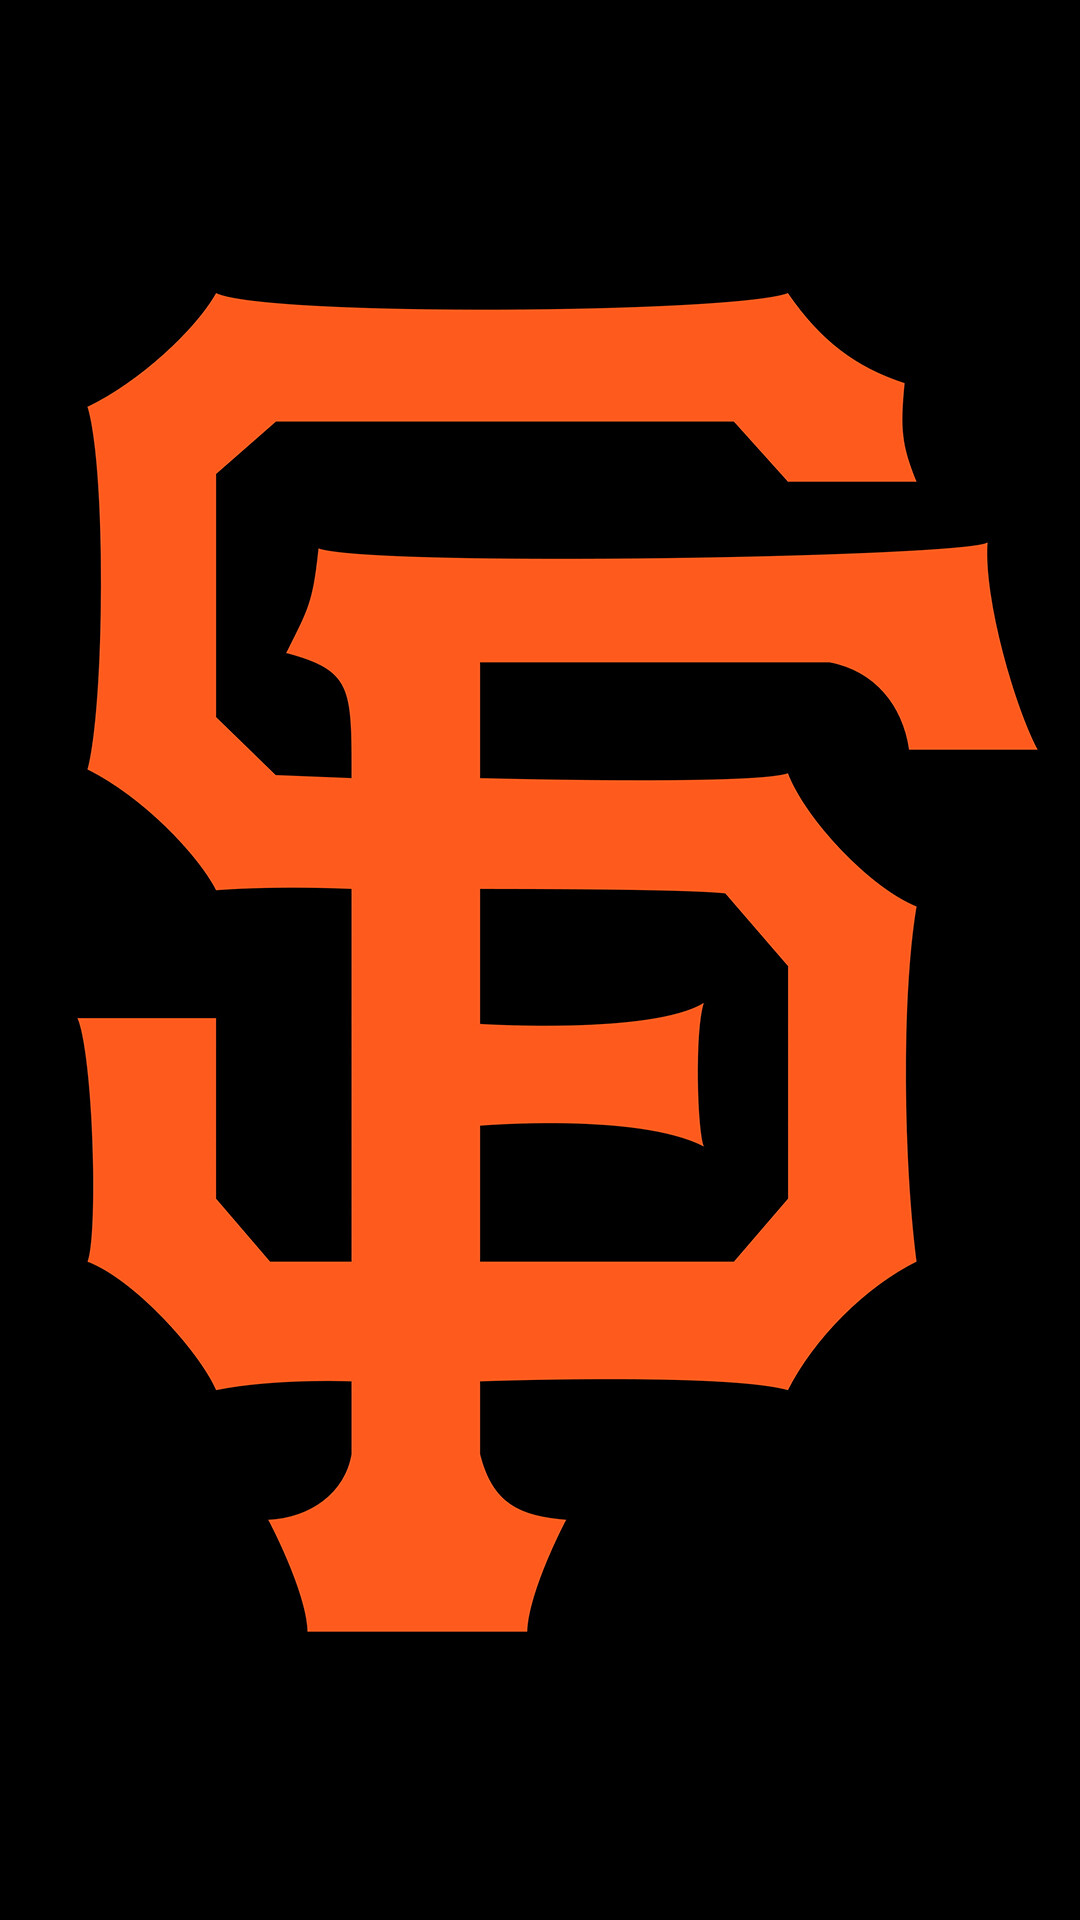 San Francisco Giants: The first National League team to hire a black manager, Frank Robinson. 1080x1920 Full HD Wallpaper.